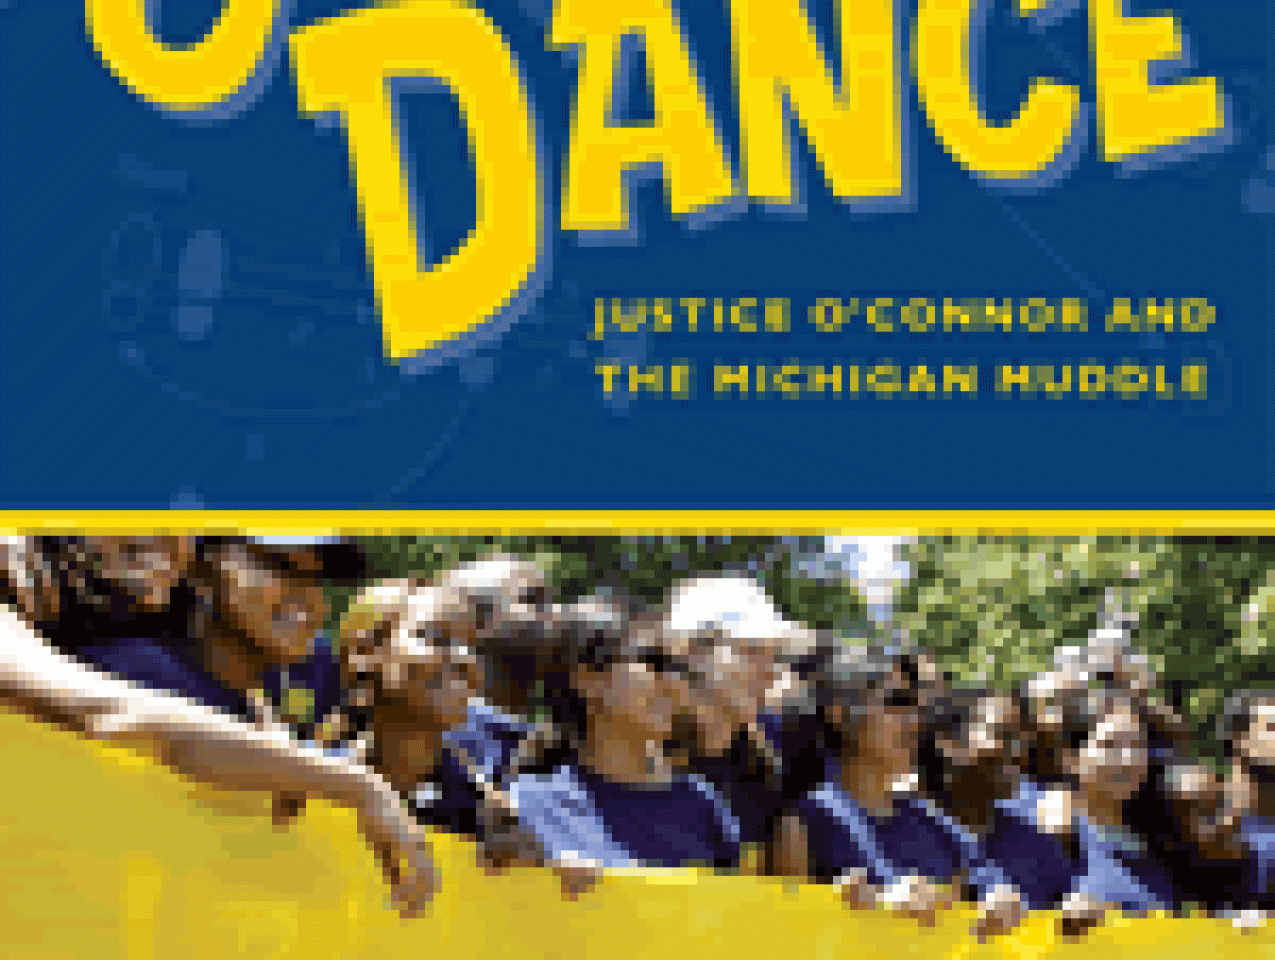 Image for Swing Dance: Justice O'Connor and the Michigan Muddle